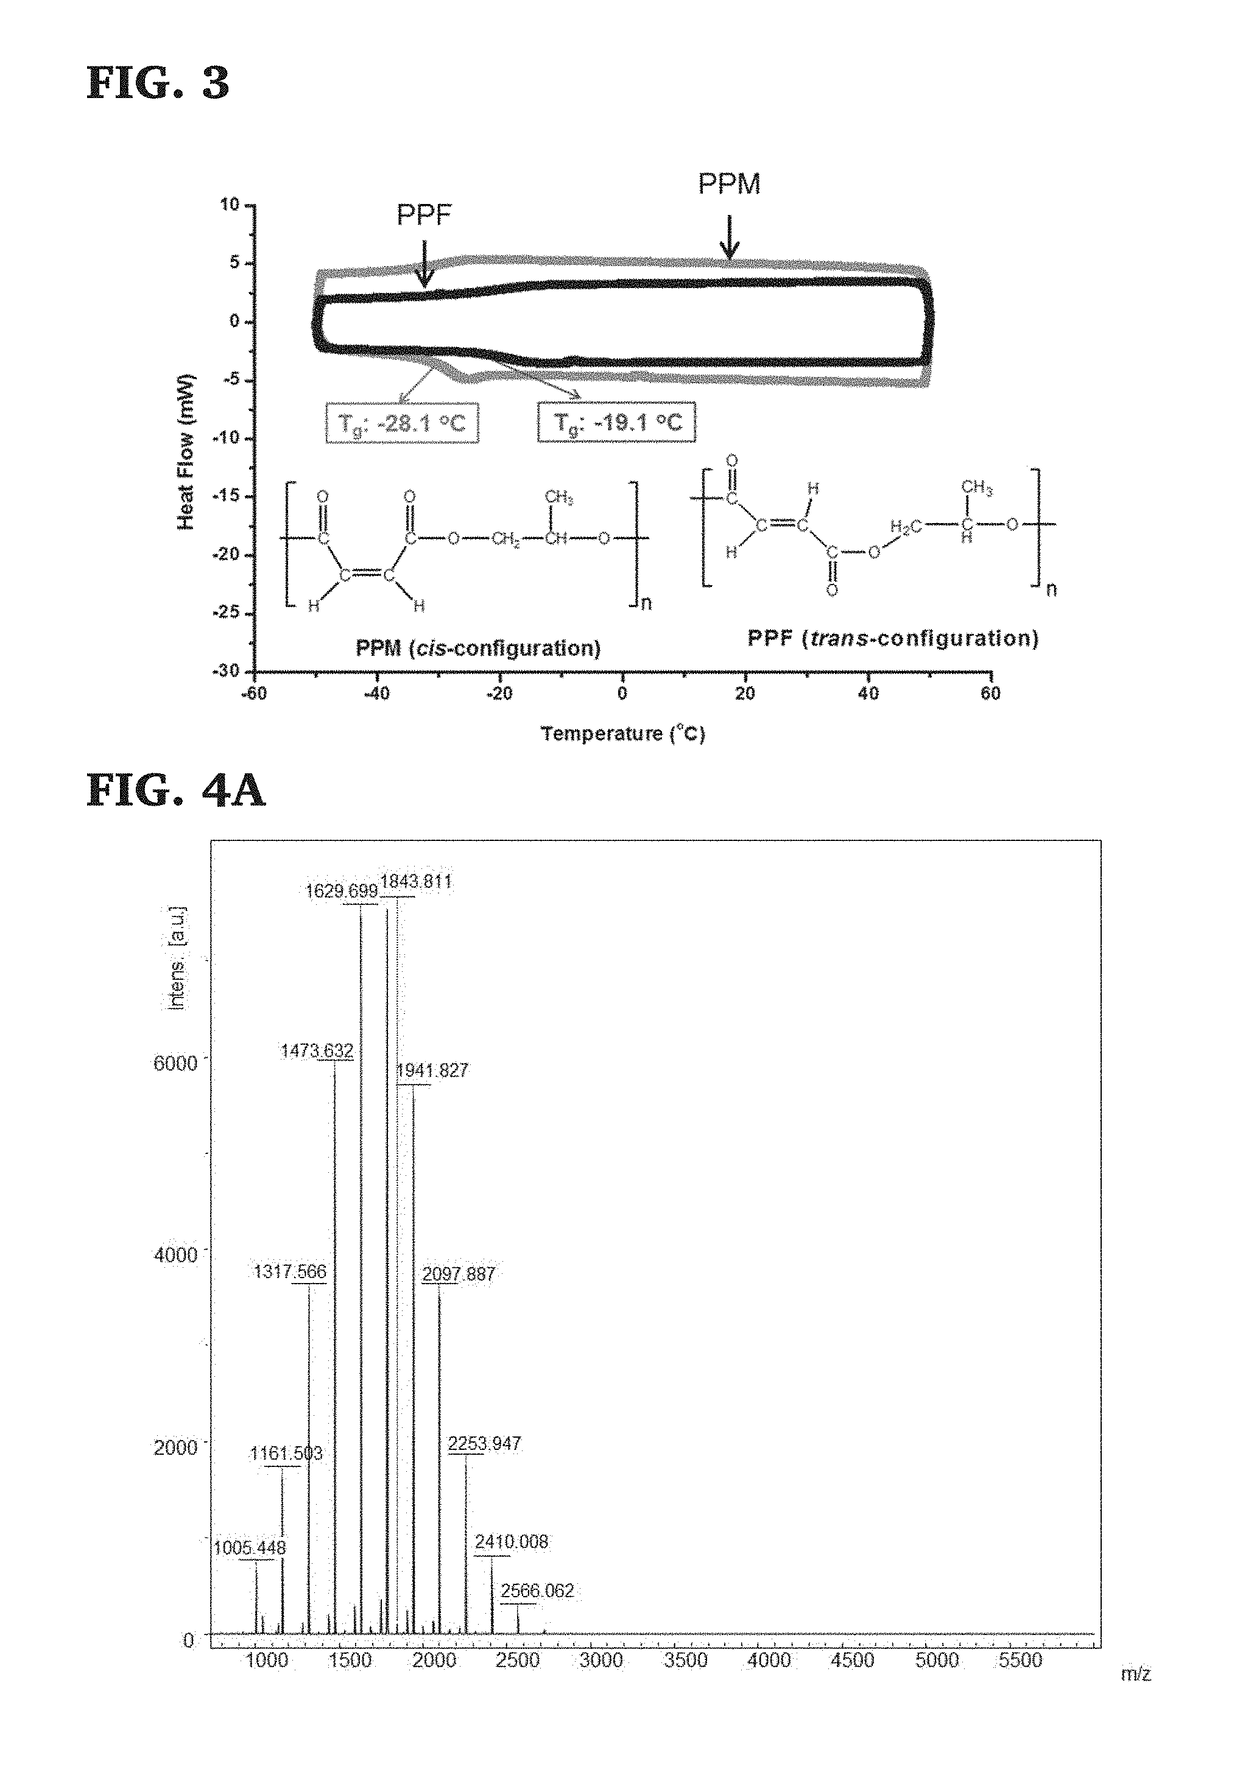 Well-defined degradable poly(propylene fumarate) polymers and scalable methods for the synthesis thereof